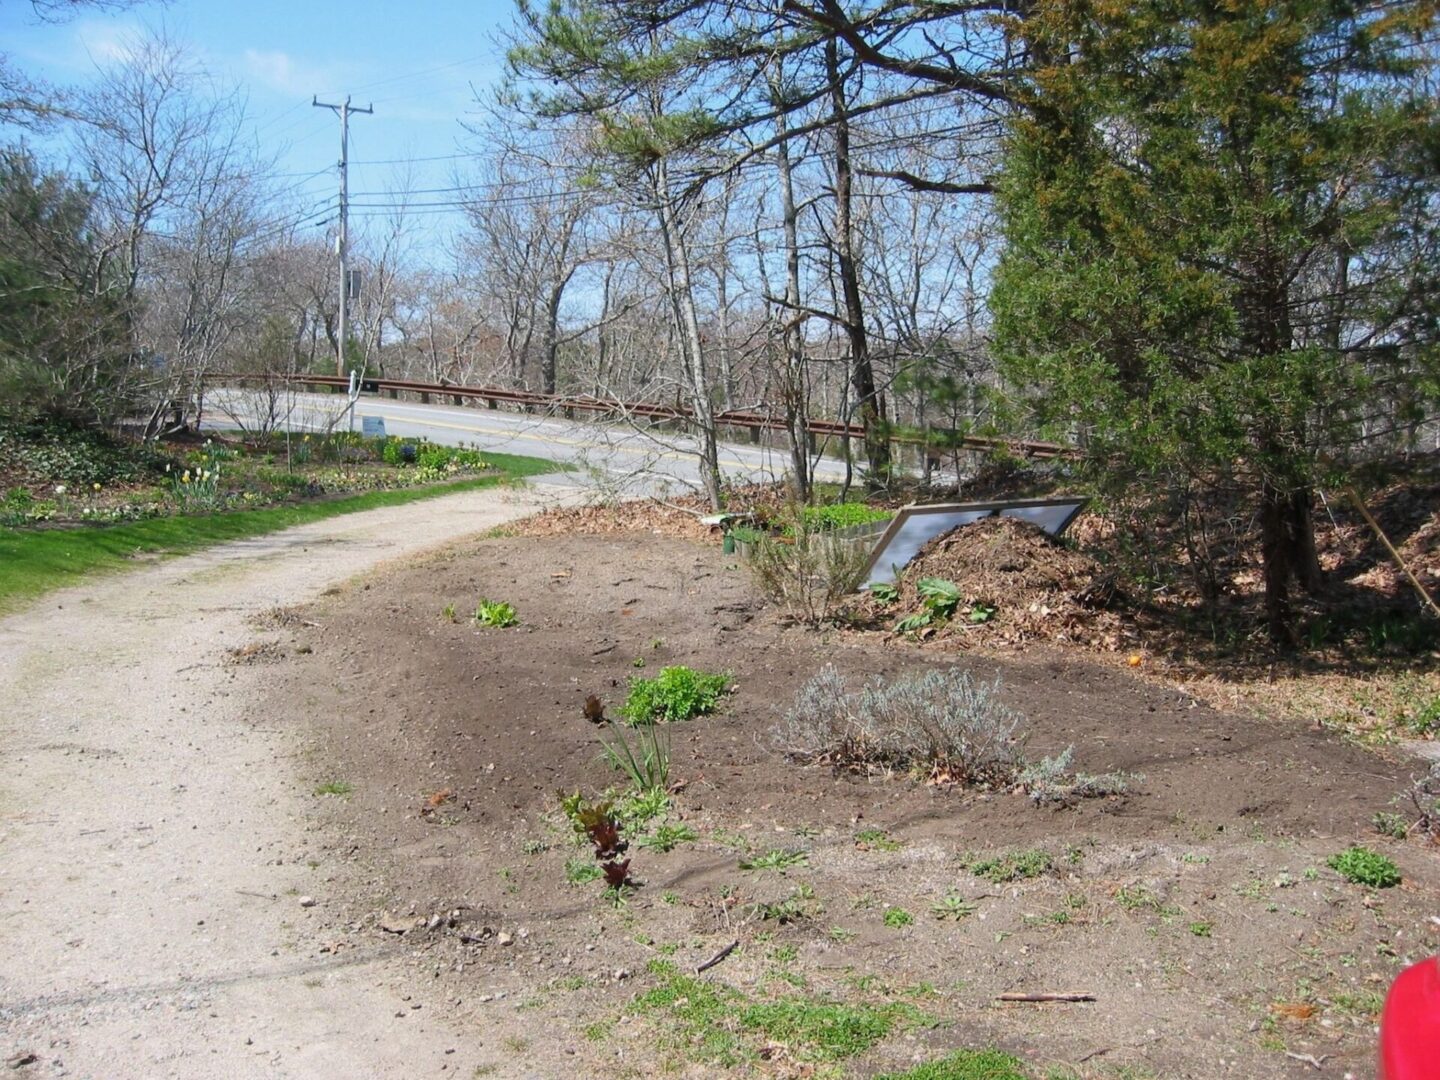 A dirt road with trees and bushes on the side.